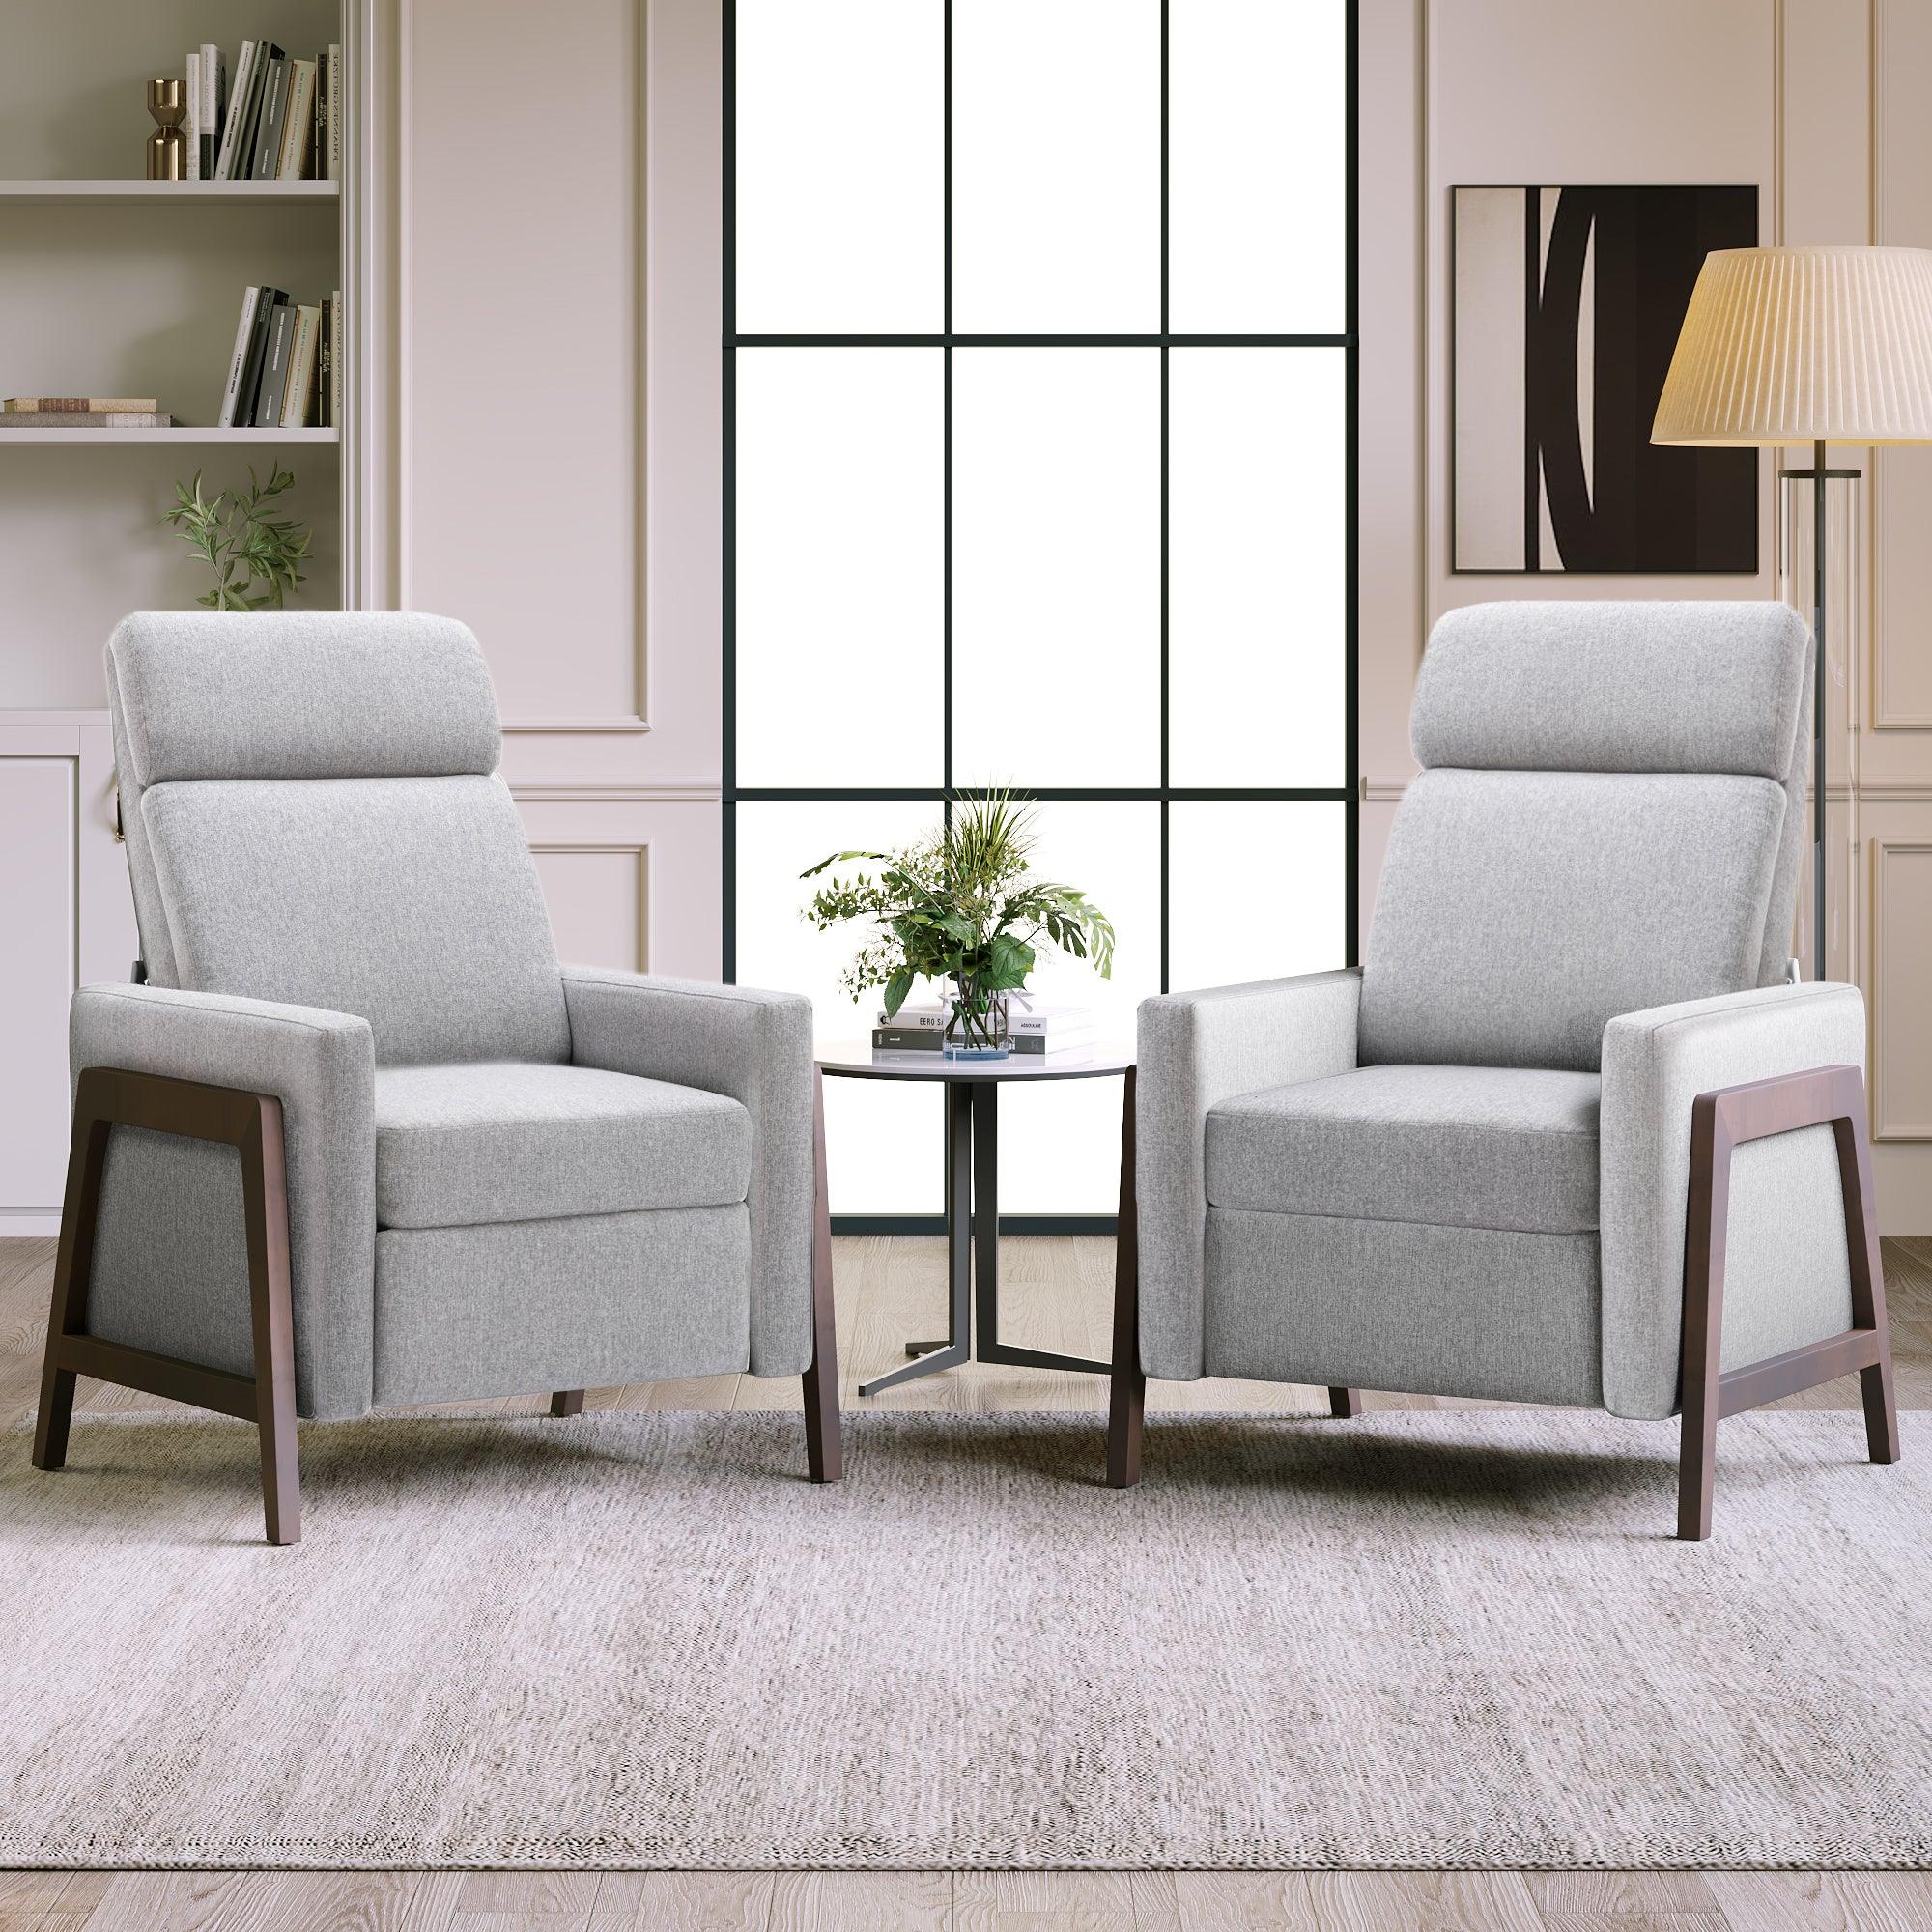 🆓🚛 Set Of 2 Wood-Framed Upholstered Recliner Chair Adjustable Home Theater Seating With Thick Seat Cushion & Backrest Modern Living Room Recliners, Gray